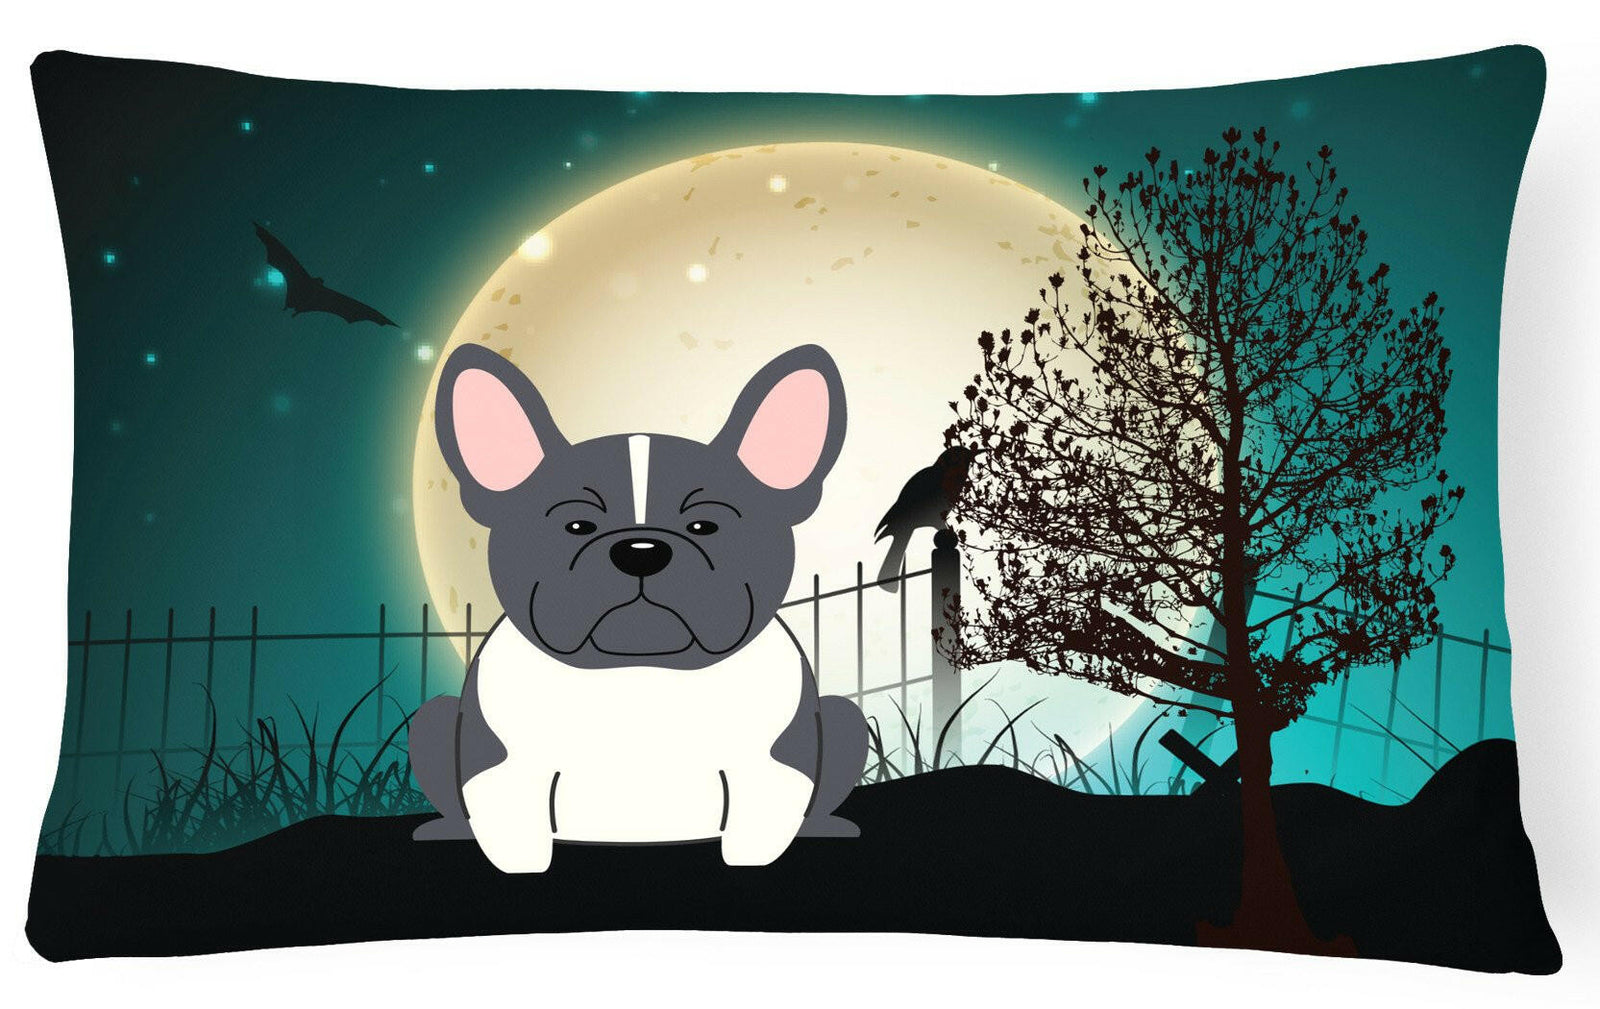 Halloween Scary French Bulldog Black White Canvas Fabric Decorative Pillow BB2202PW1216 by Caroline's Treasures